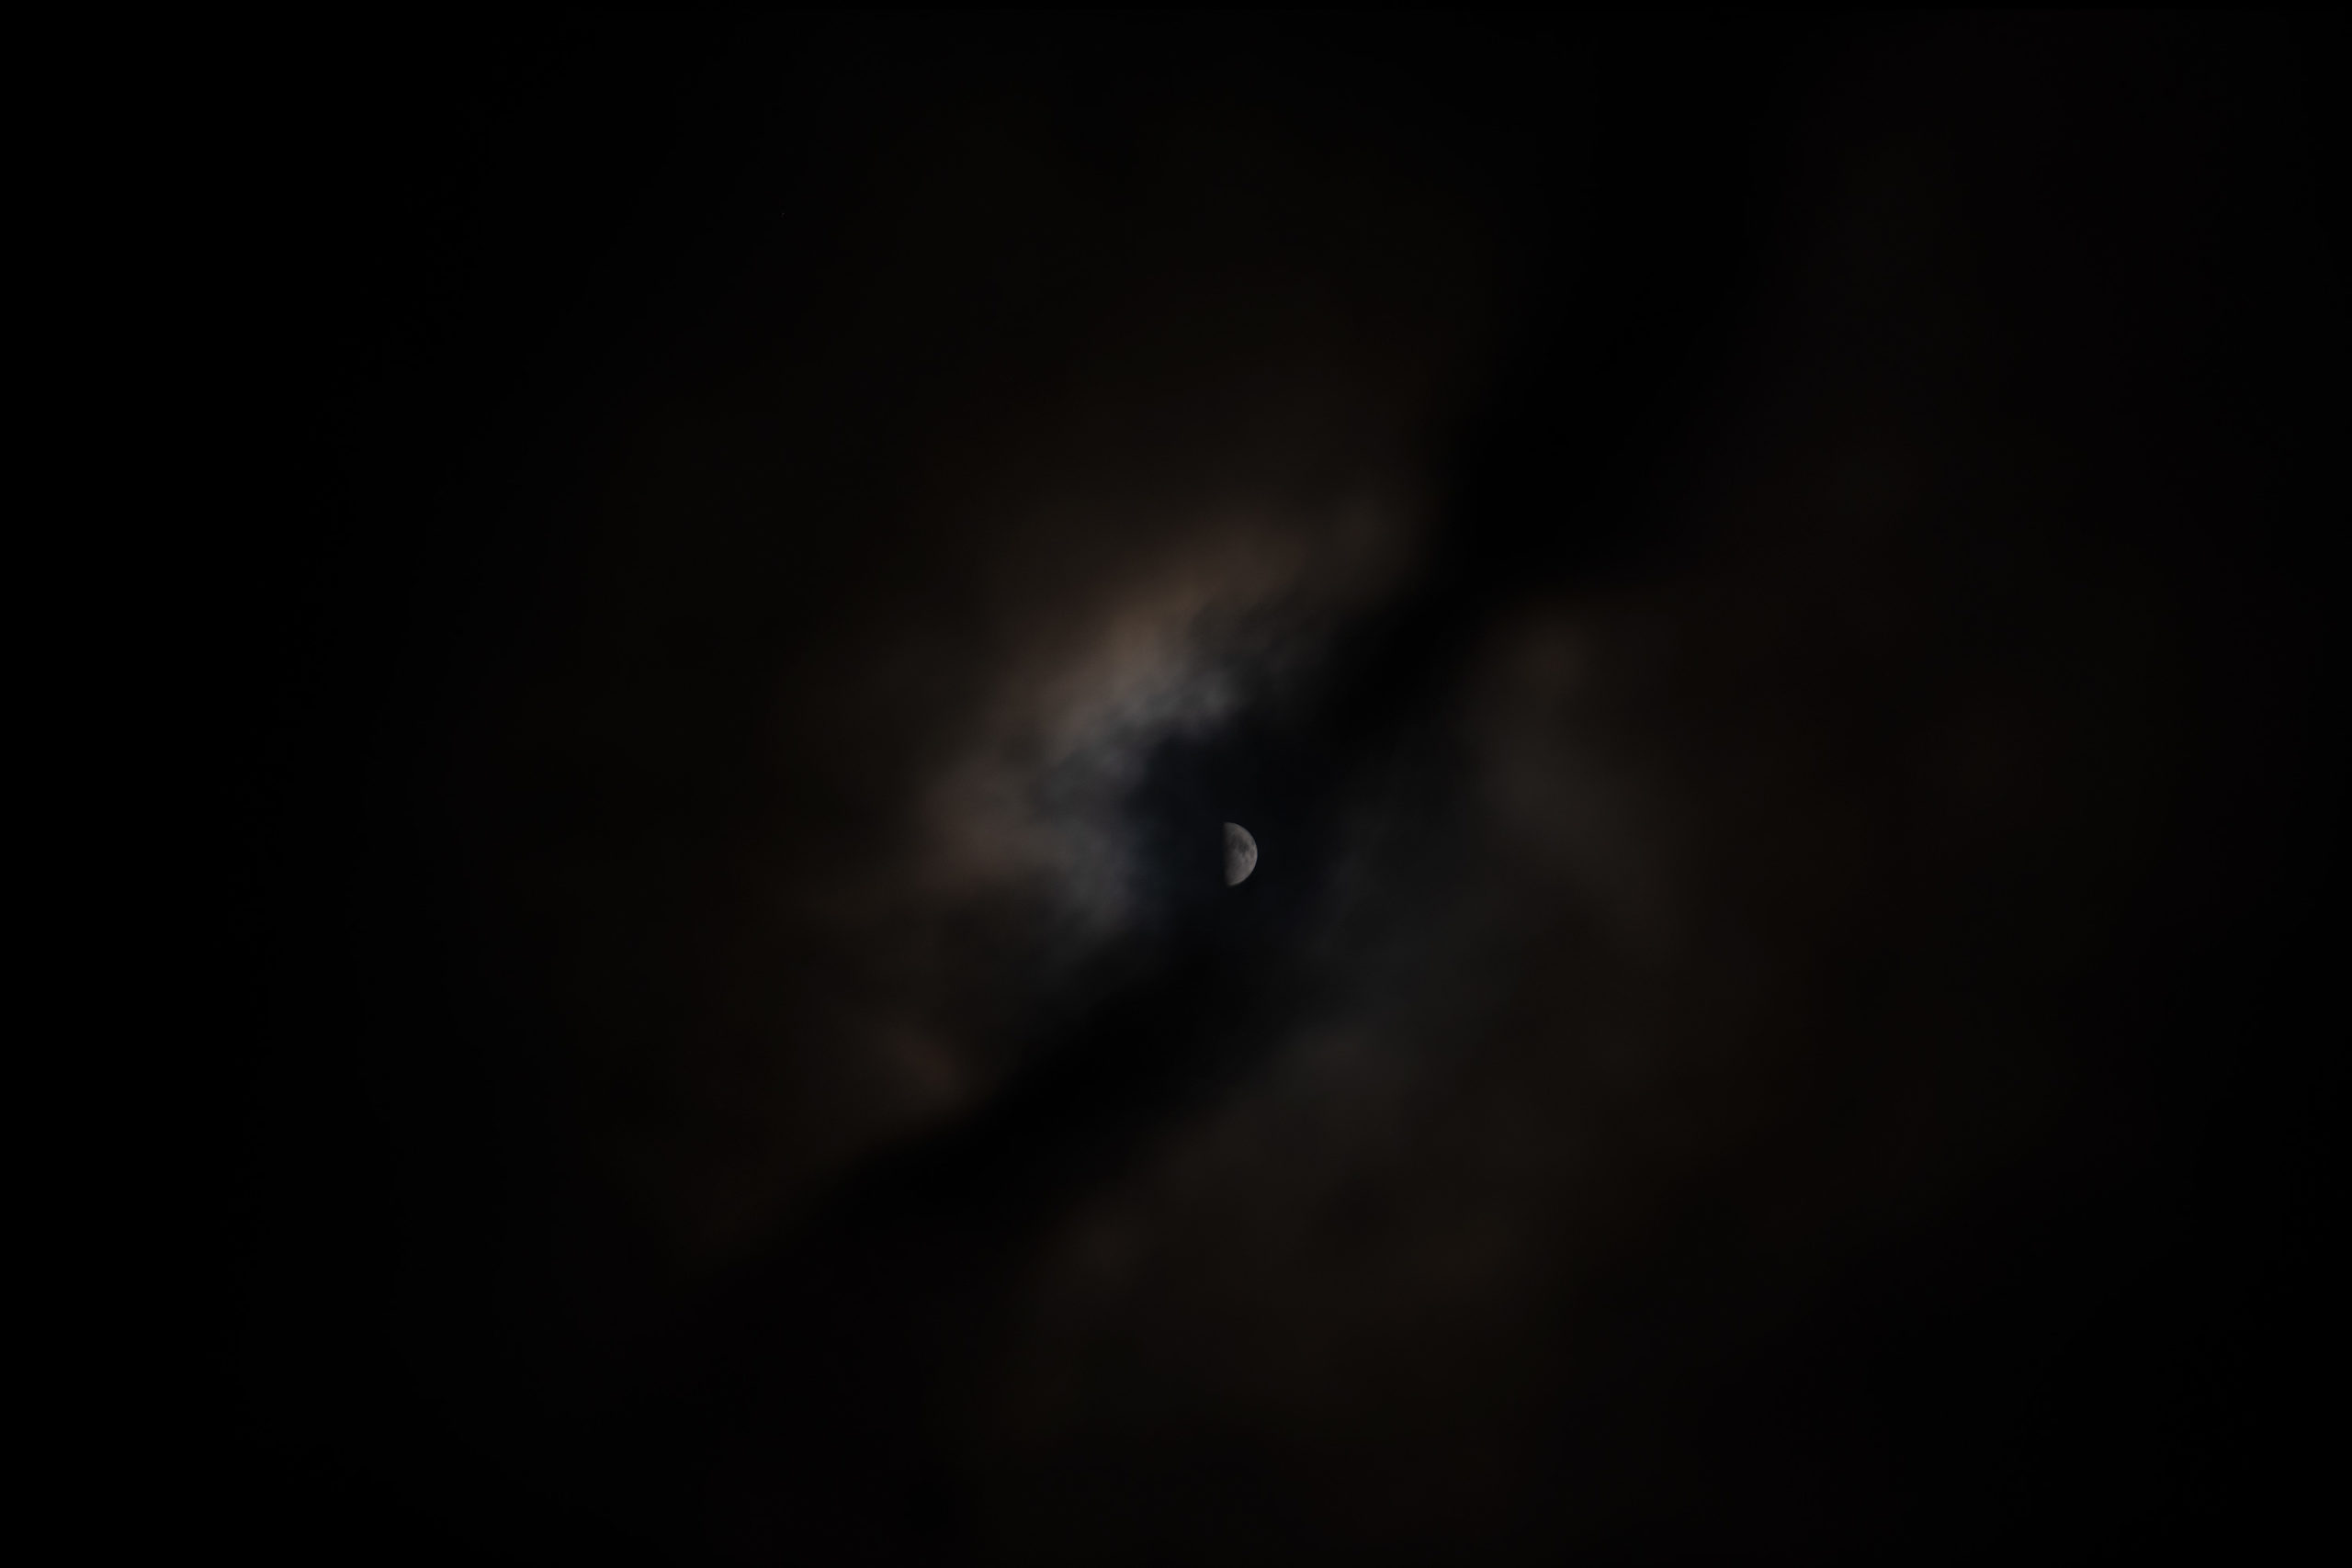 (Before Editing) Photo of the moon shining through clouds at night